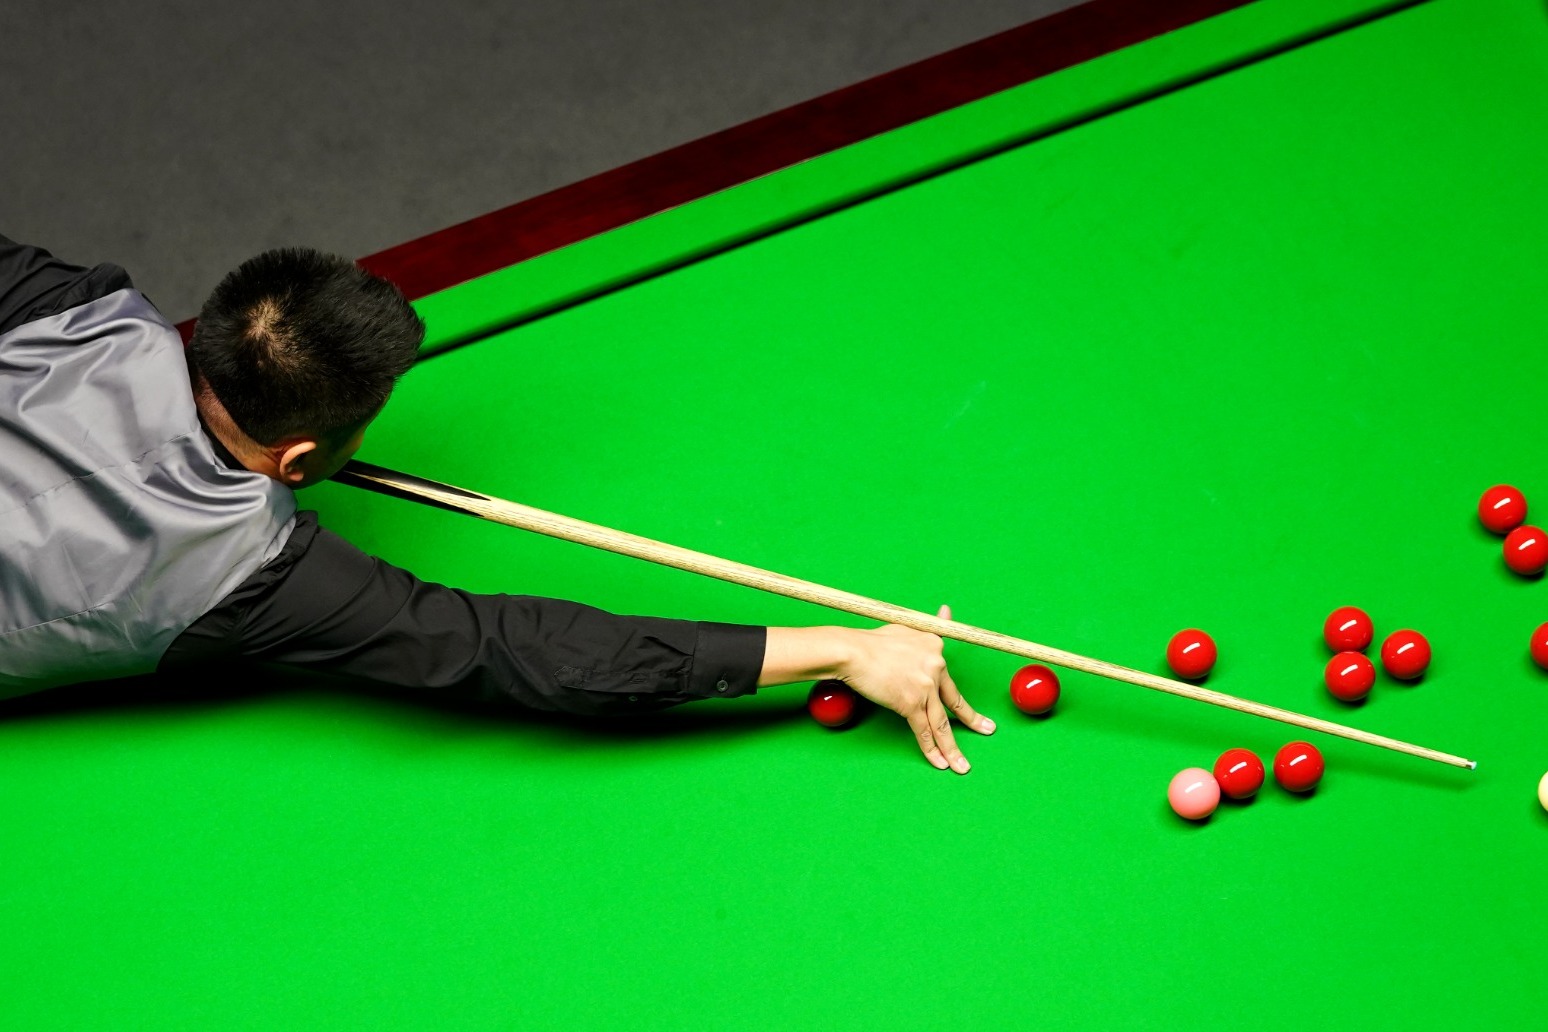 Liang Wenbo suspended from World Snooker Tour while misconduct probe ongoing